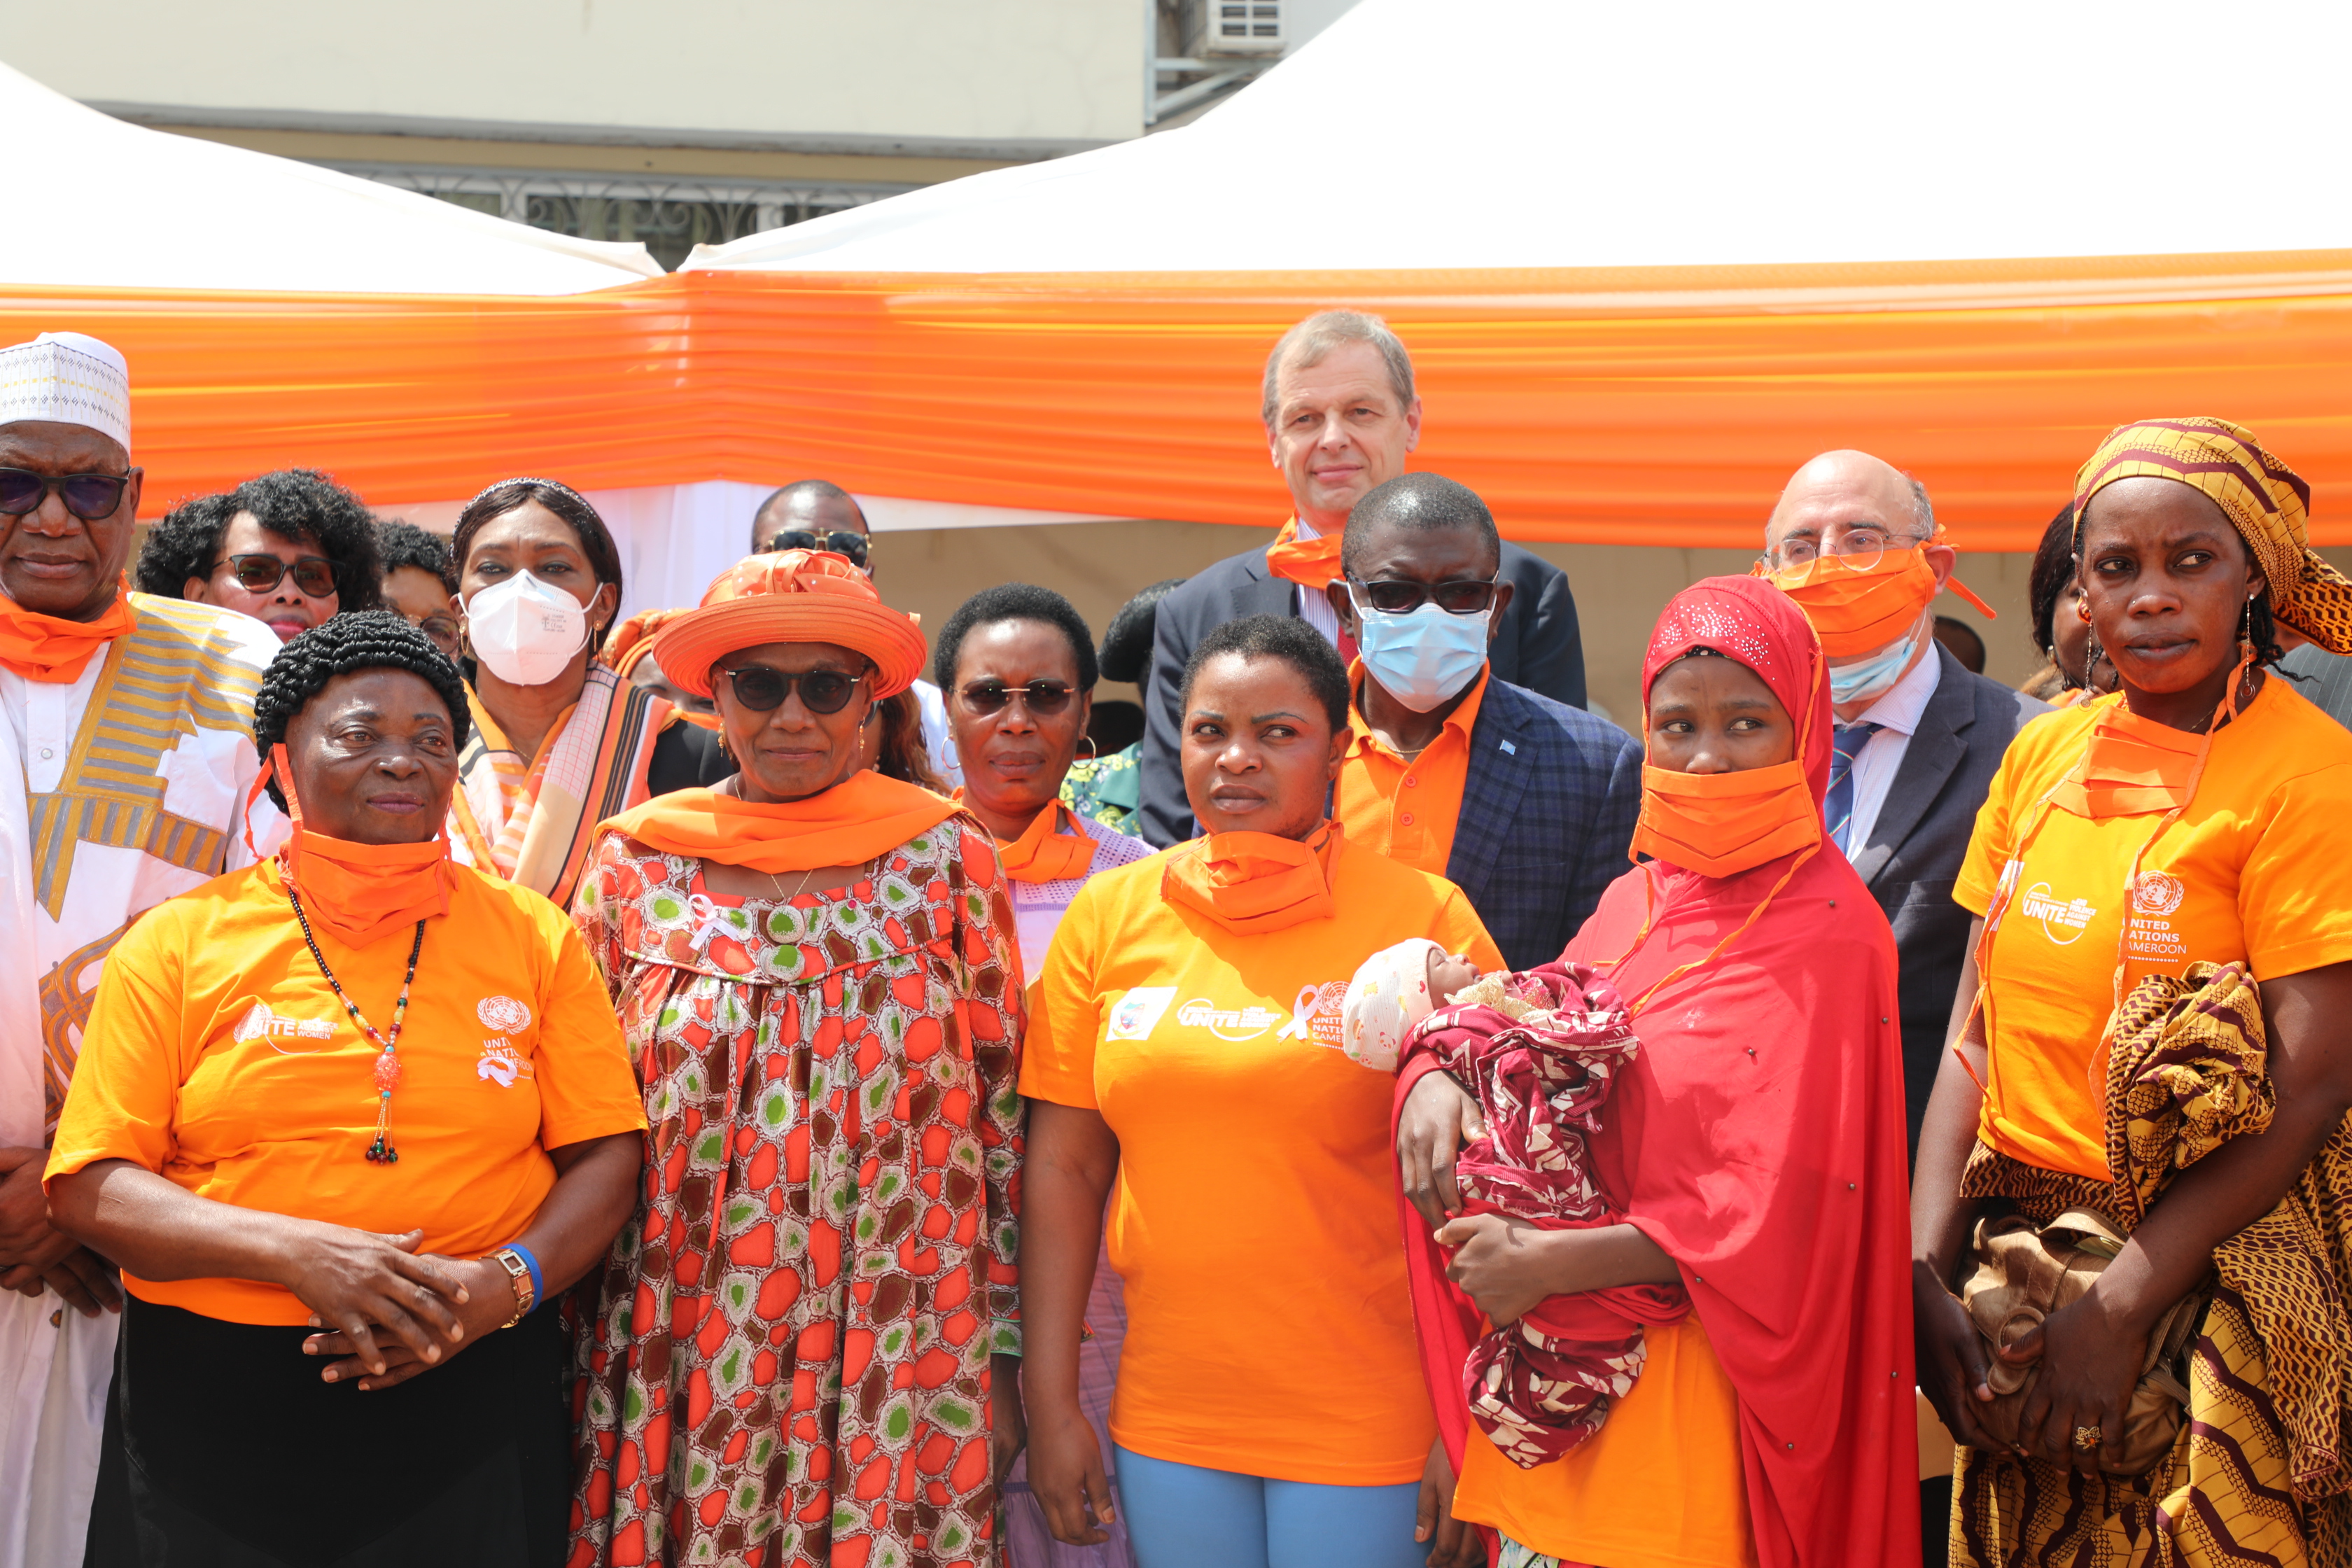 Official launch of the 16 days of activism campaign to end violence against women and girls – Yaounde Cameroon November 24th, 2021